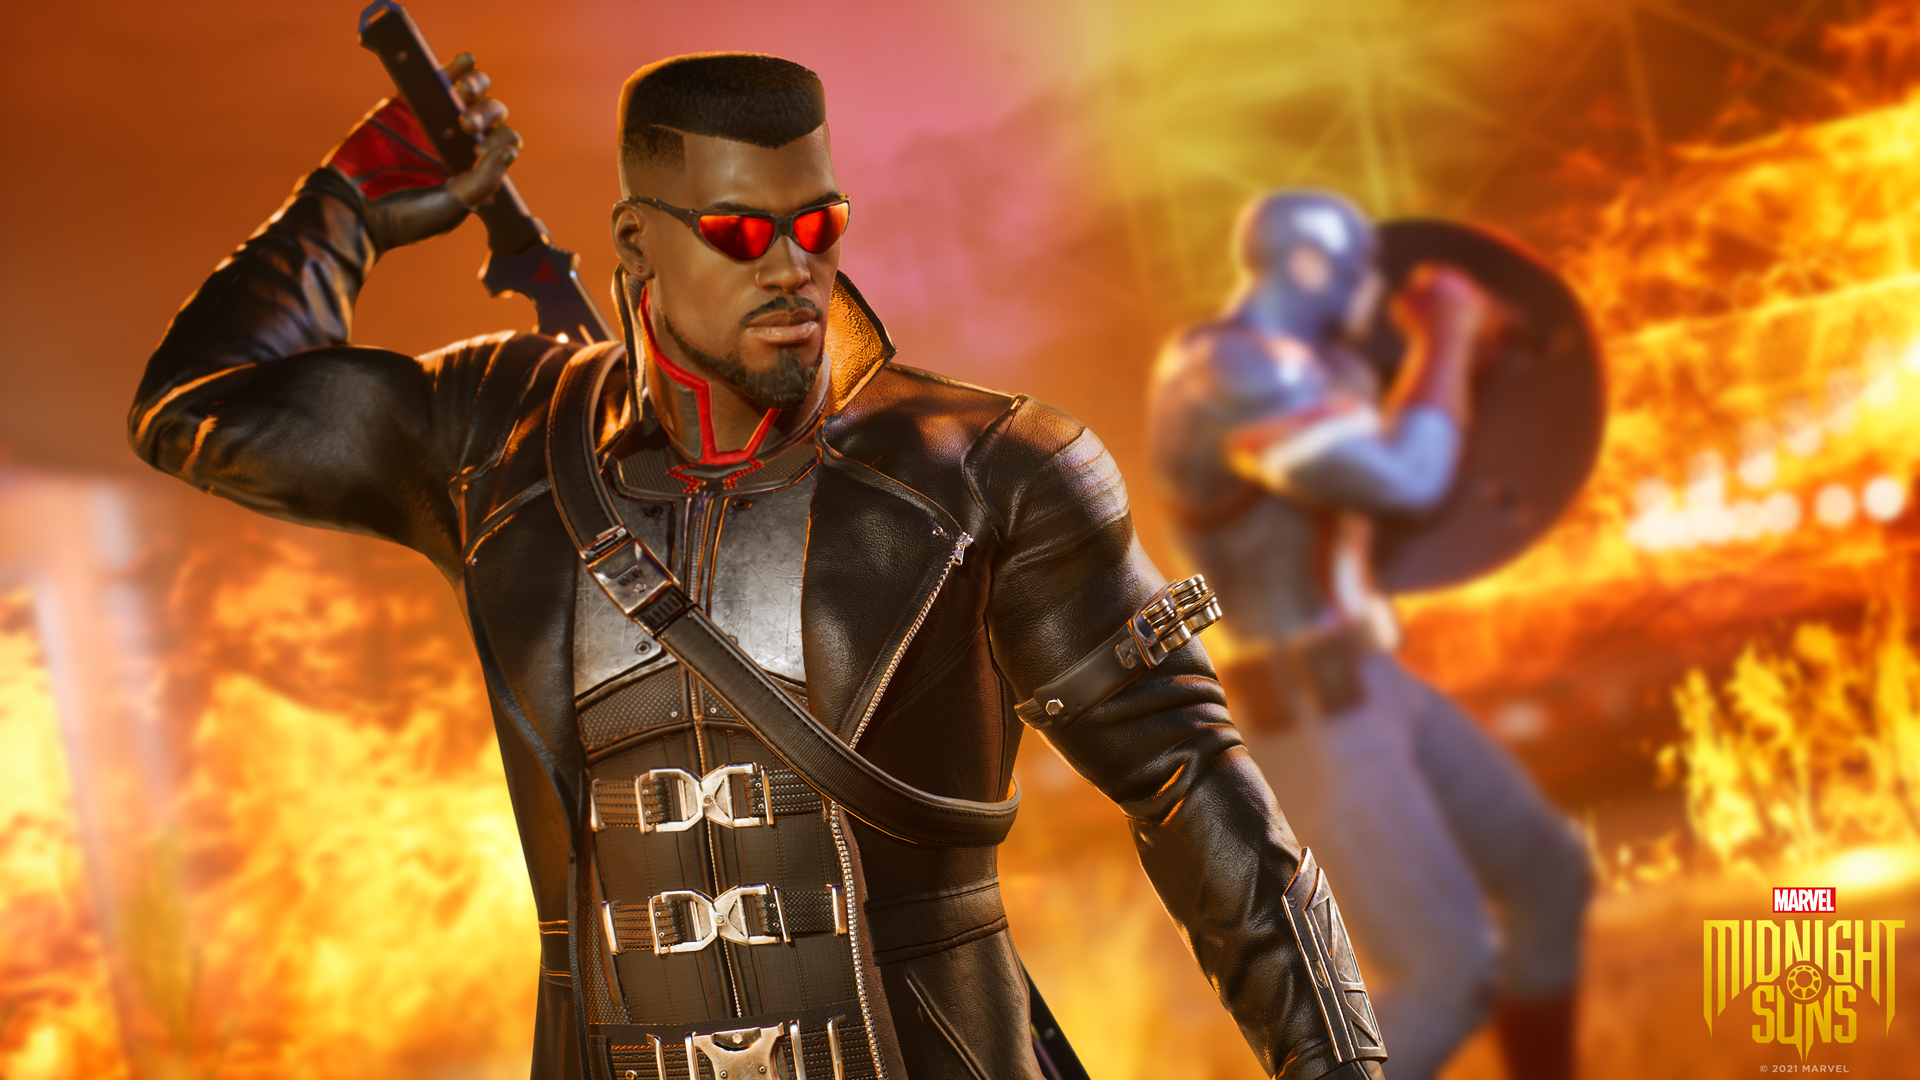 Marvel’s Midnight Suns director says his new game is “the opposite of XCOM”